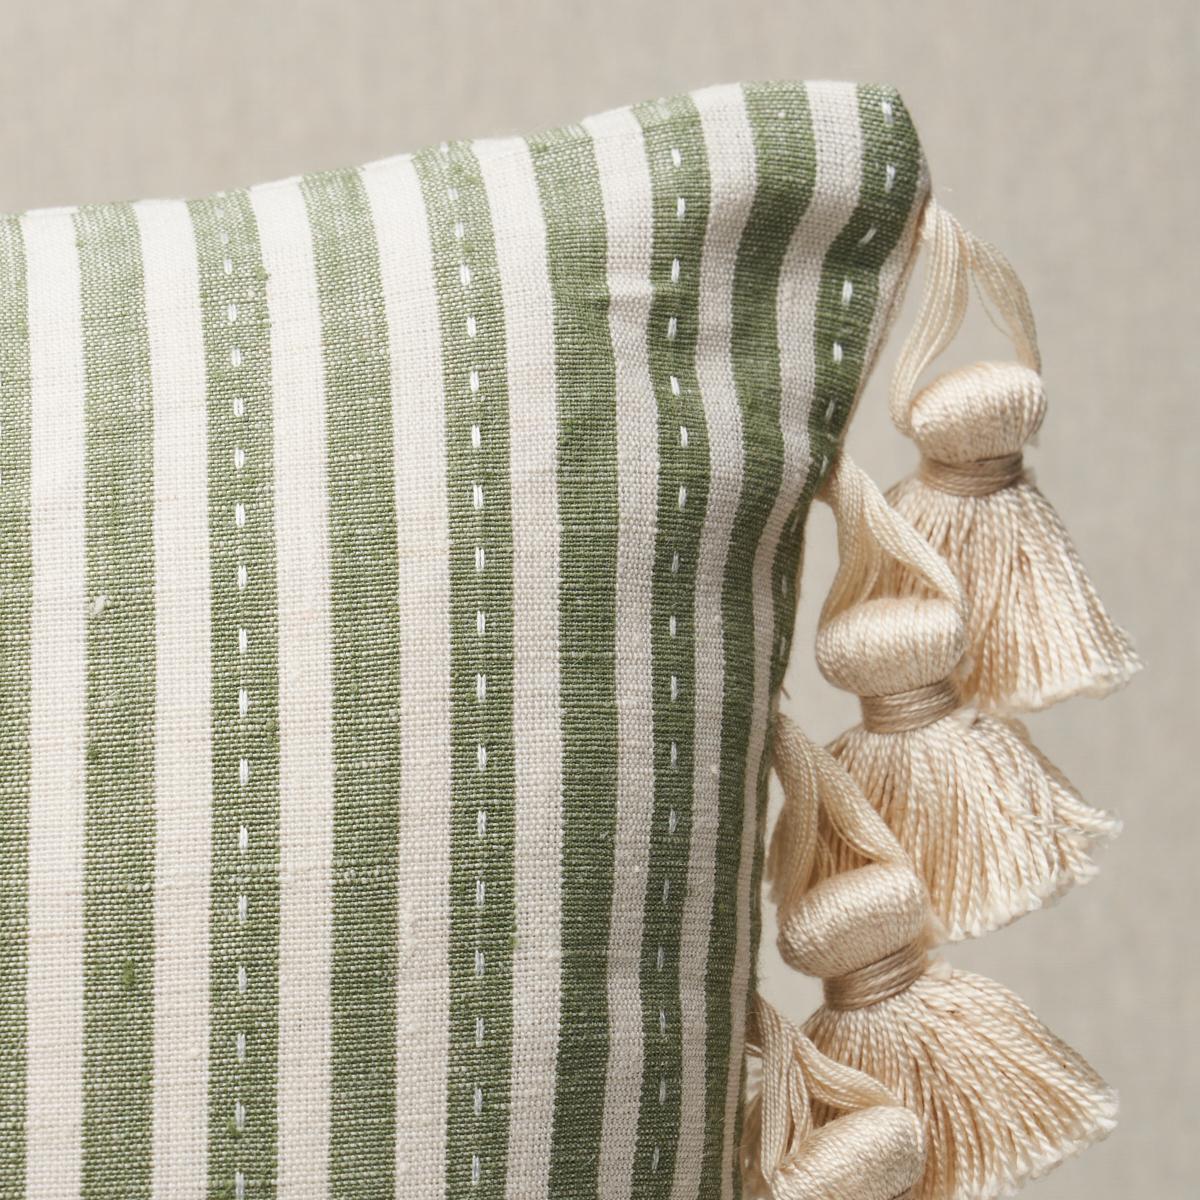 This pillow features Mathis Ticking Stripe with a welt on a bias finish. Printed on a linen-hemp blend with a running-stitch detail, Mathis Ticking Stripe in sage is an interesting, textural take on traditional mattress ticking. Pillow includes a